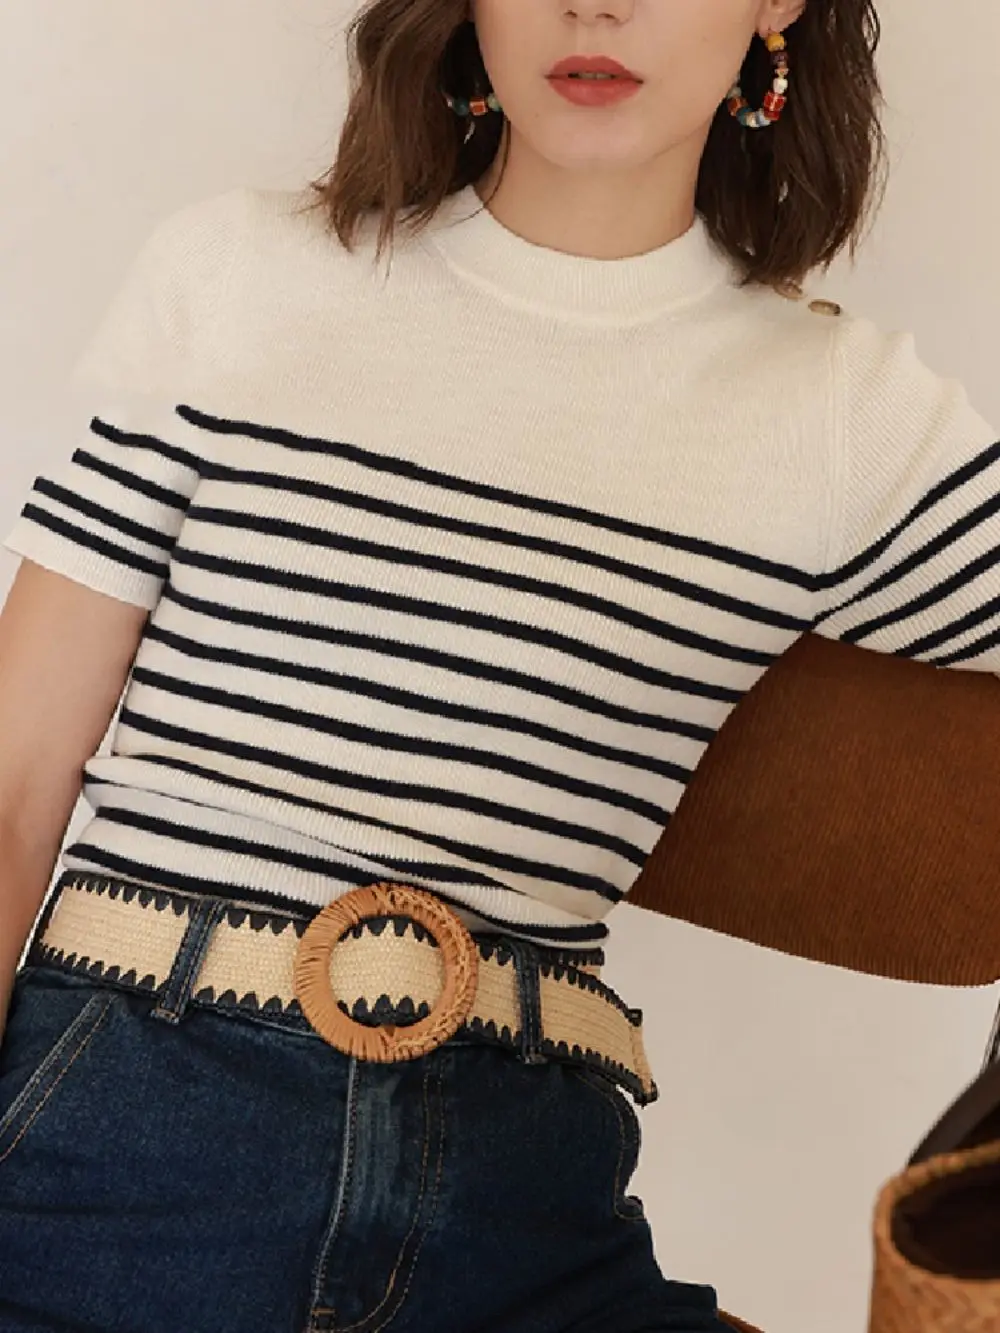 2023 Early Spring New Women Vintage Contrast Color Woven Belt Exquisite Waistband for Ladies All-Match Fashion Decoration